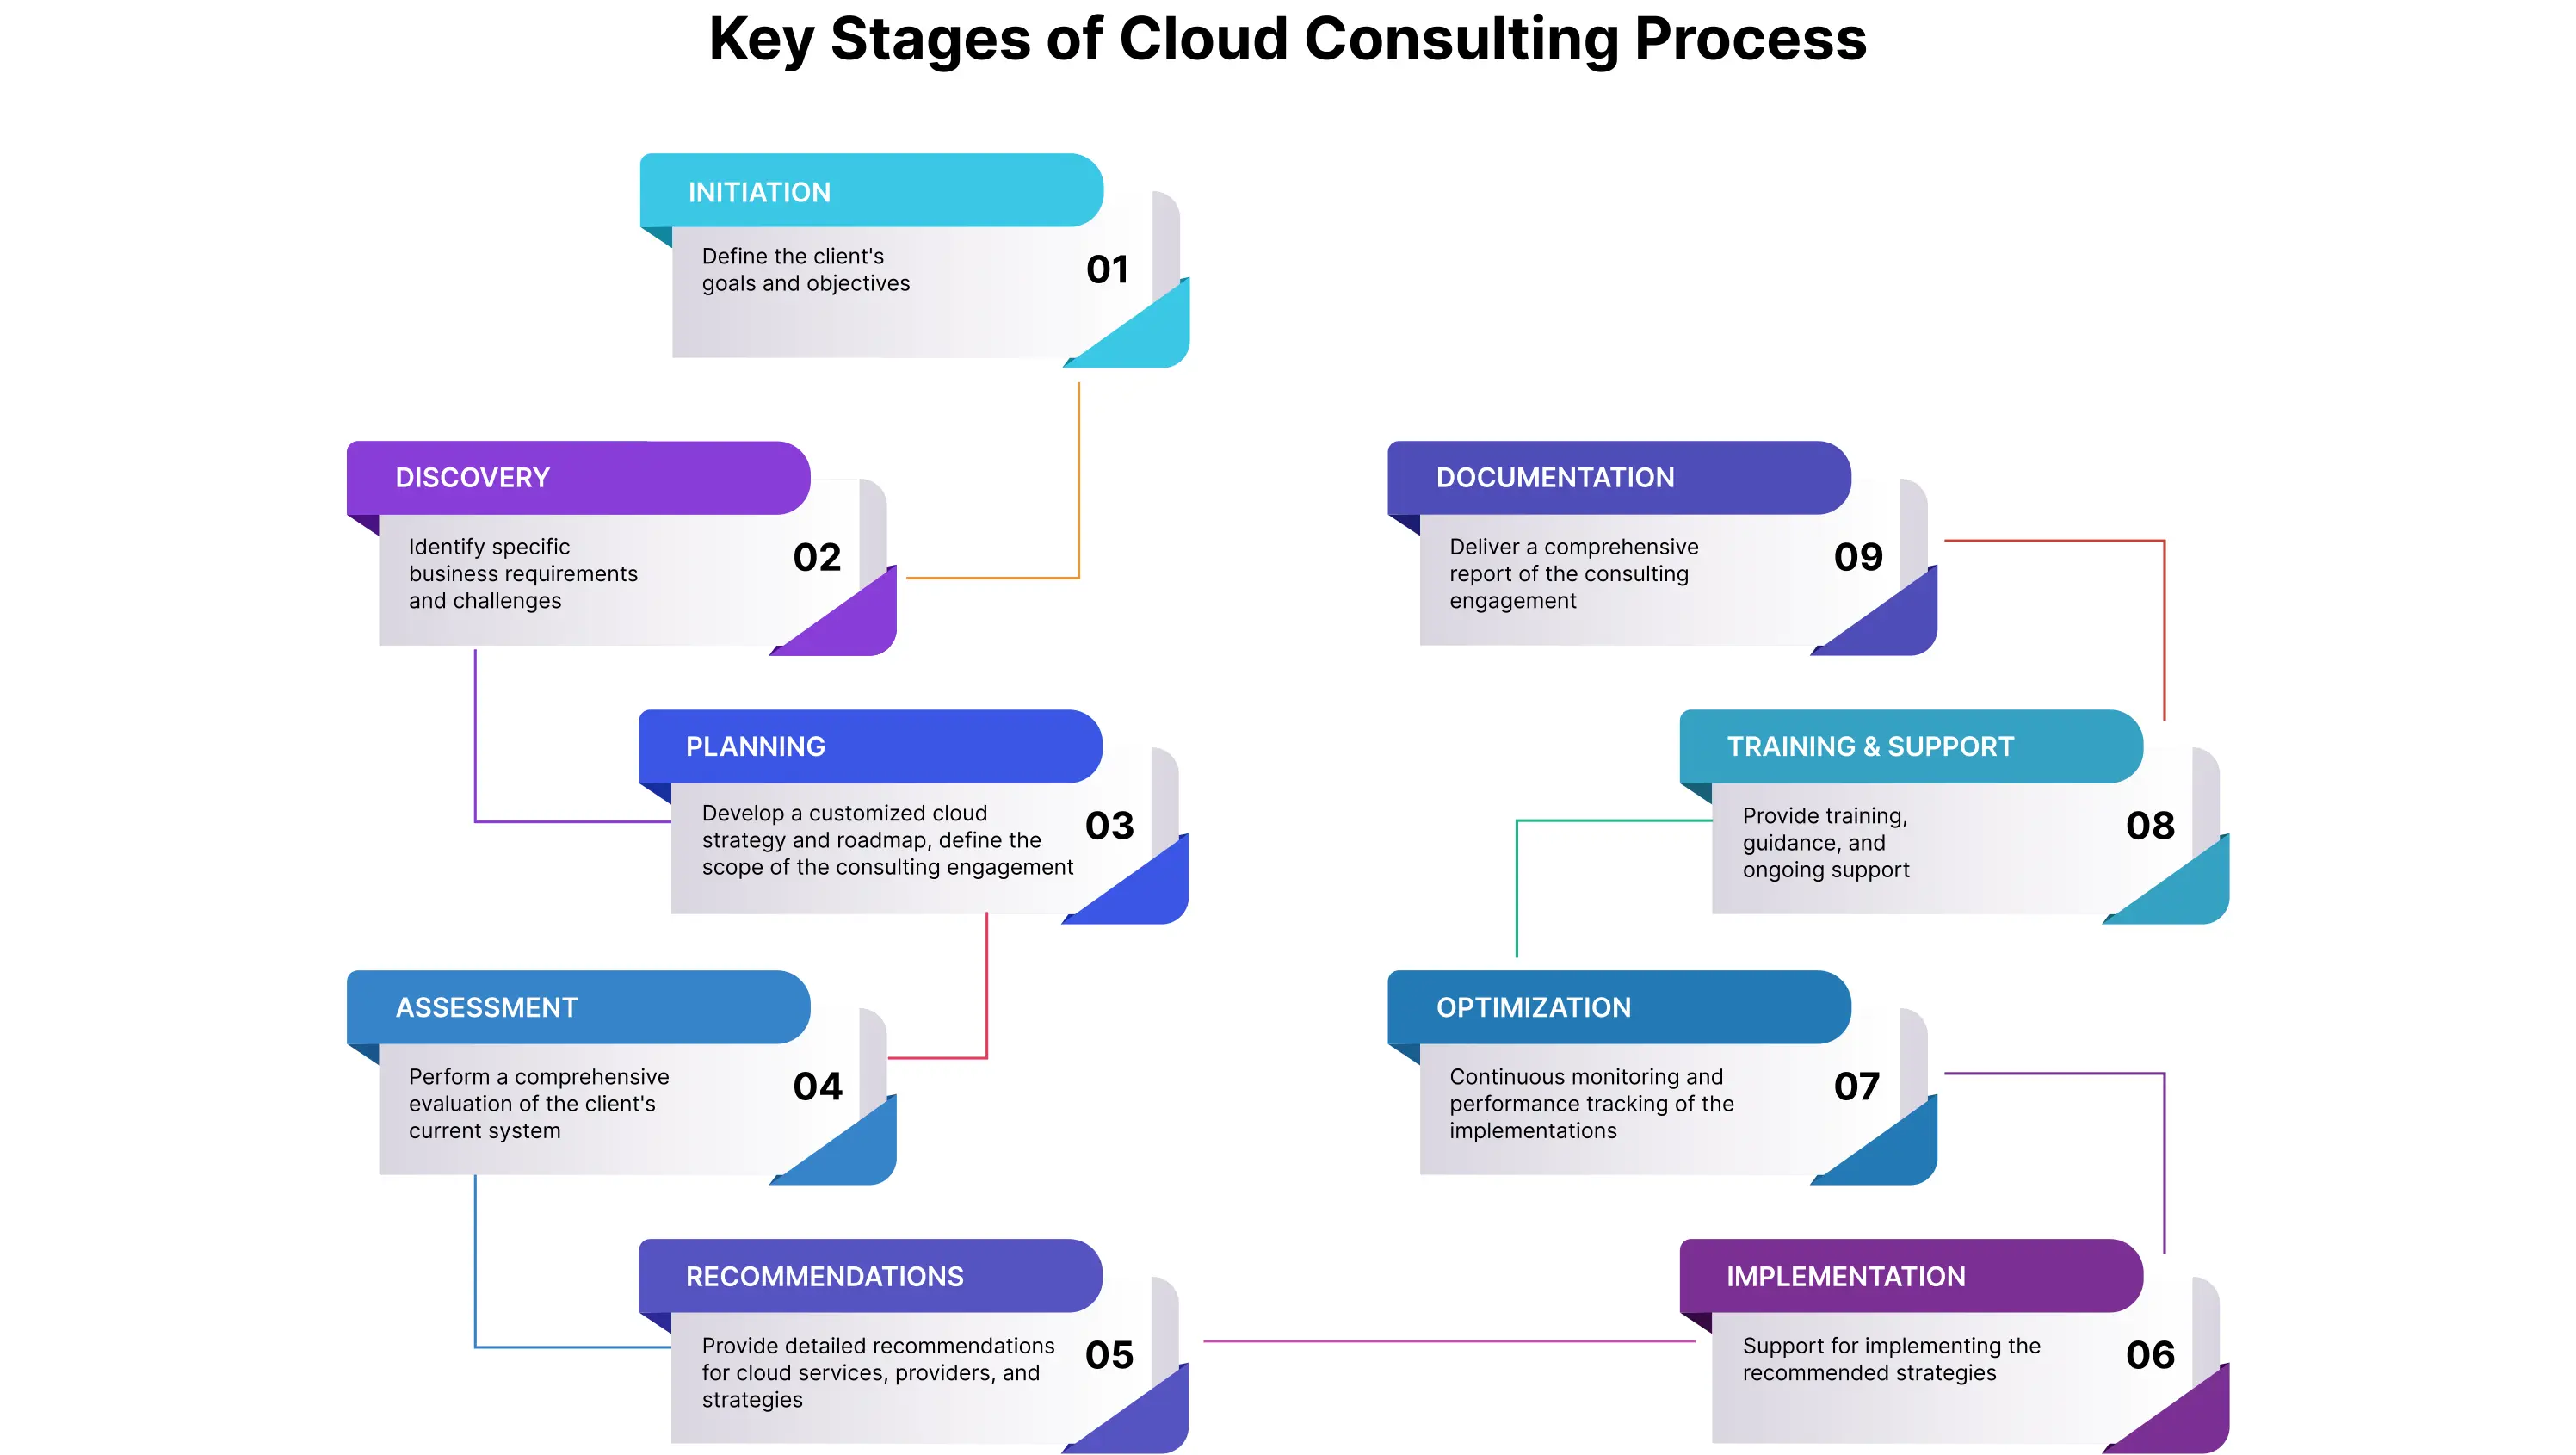 Key Stages of Cloud Consulting Process